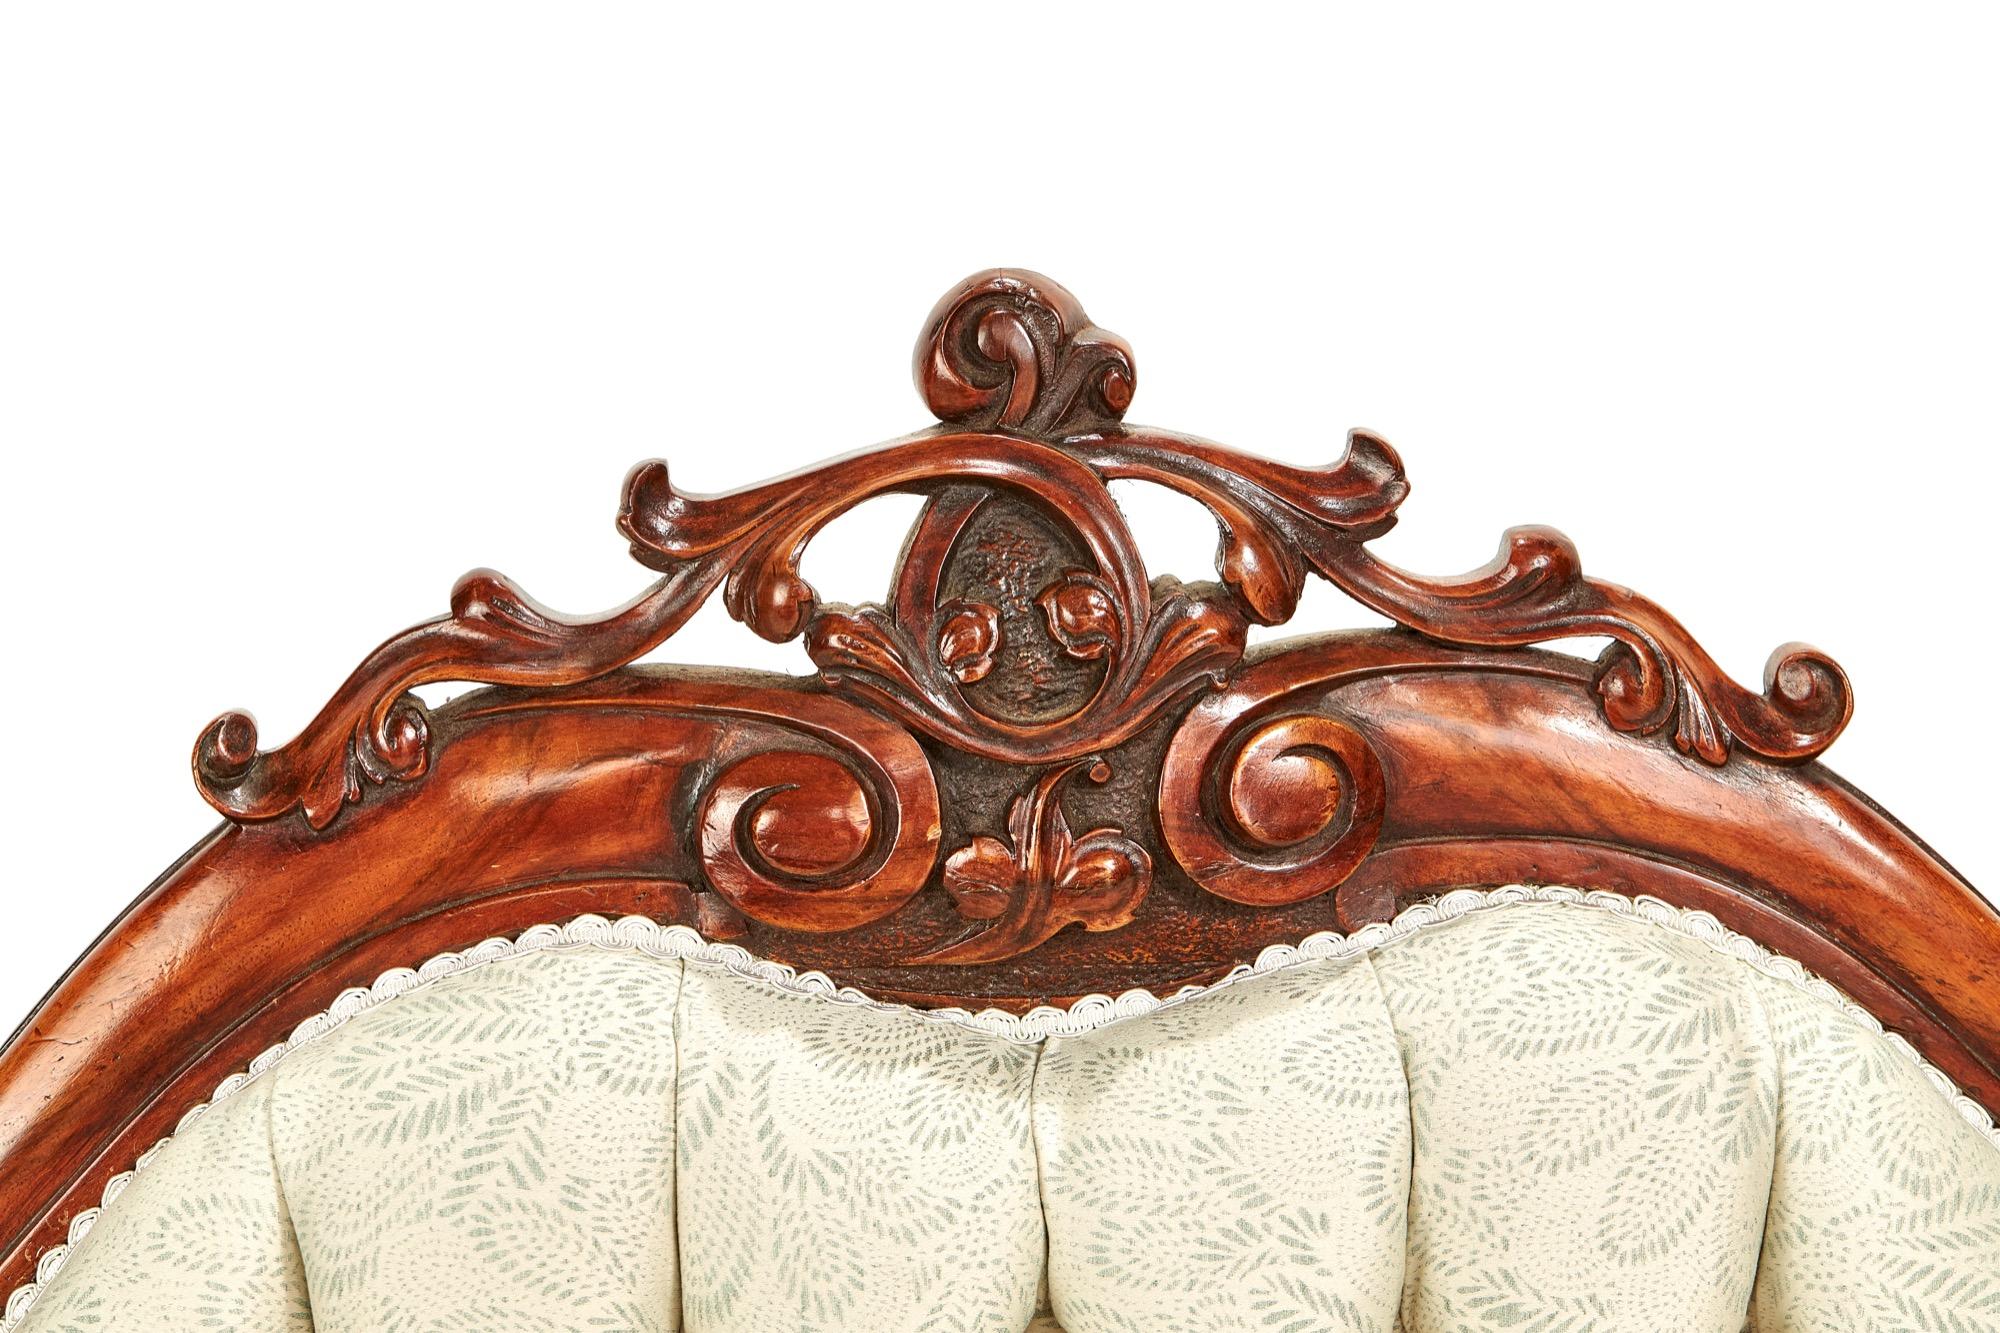 A magnificent antique 19th century Victorian walnut carved sofa having a stunning walnut show frame back with superior leaf carving decoration, walnut show frame front with delightful carved shaped front legs again with appealing carved leaf